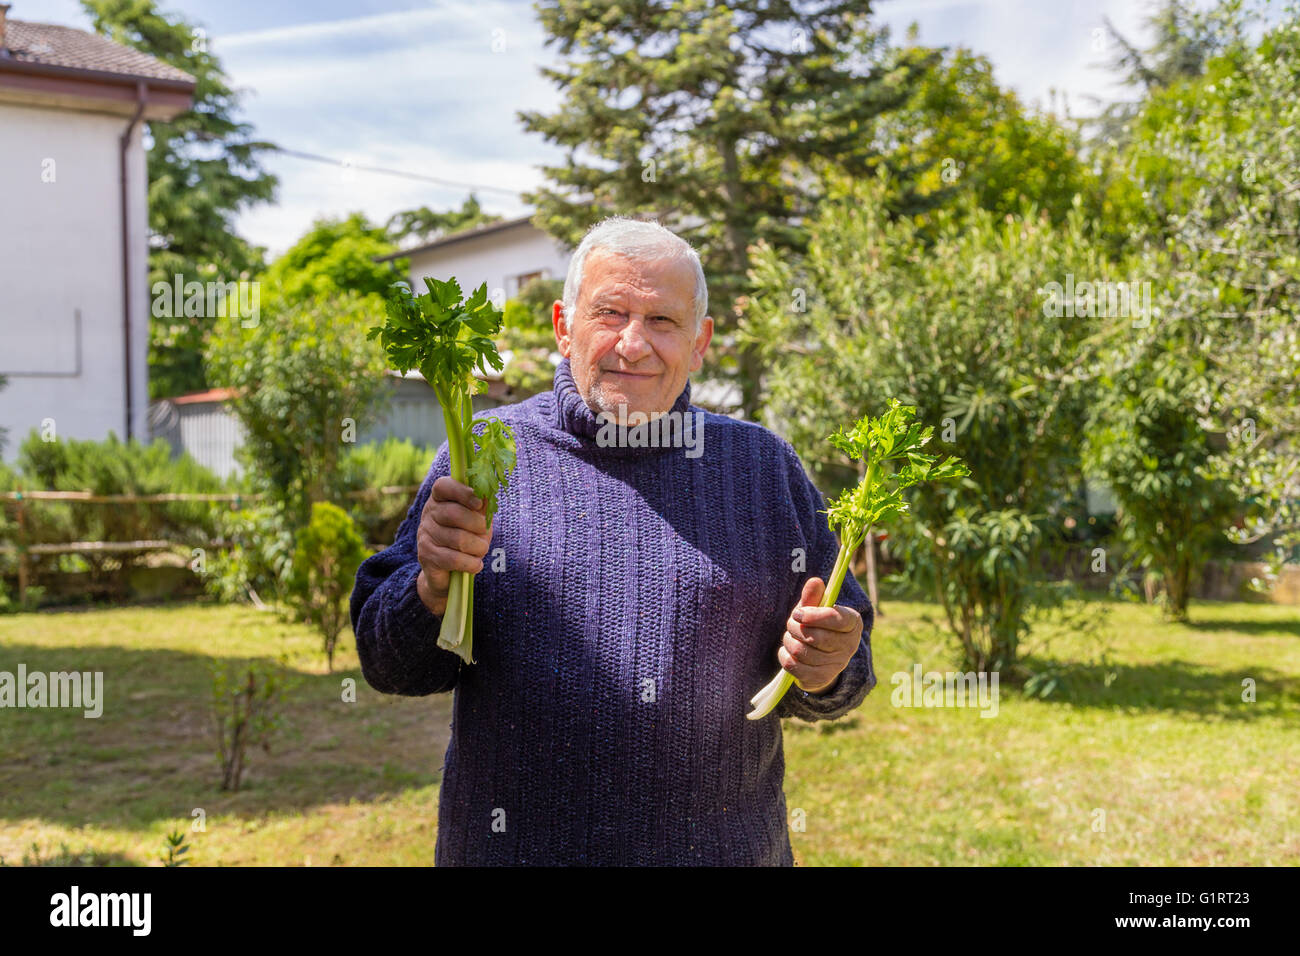 an old man is holding two stalks of celery in his backyard garden Stock Photo